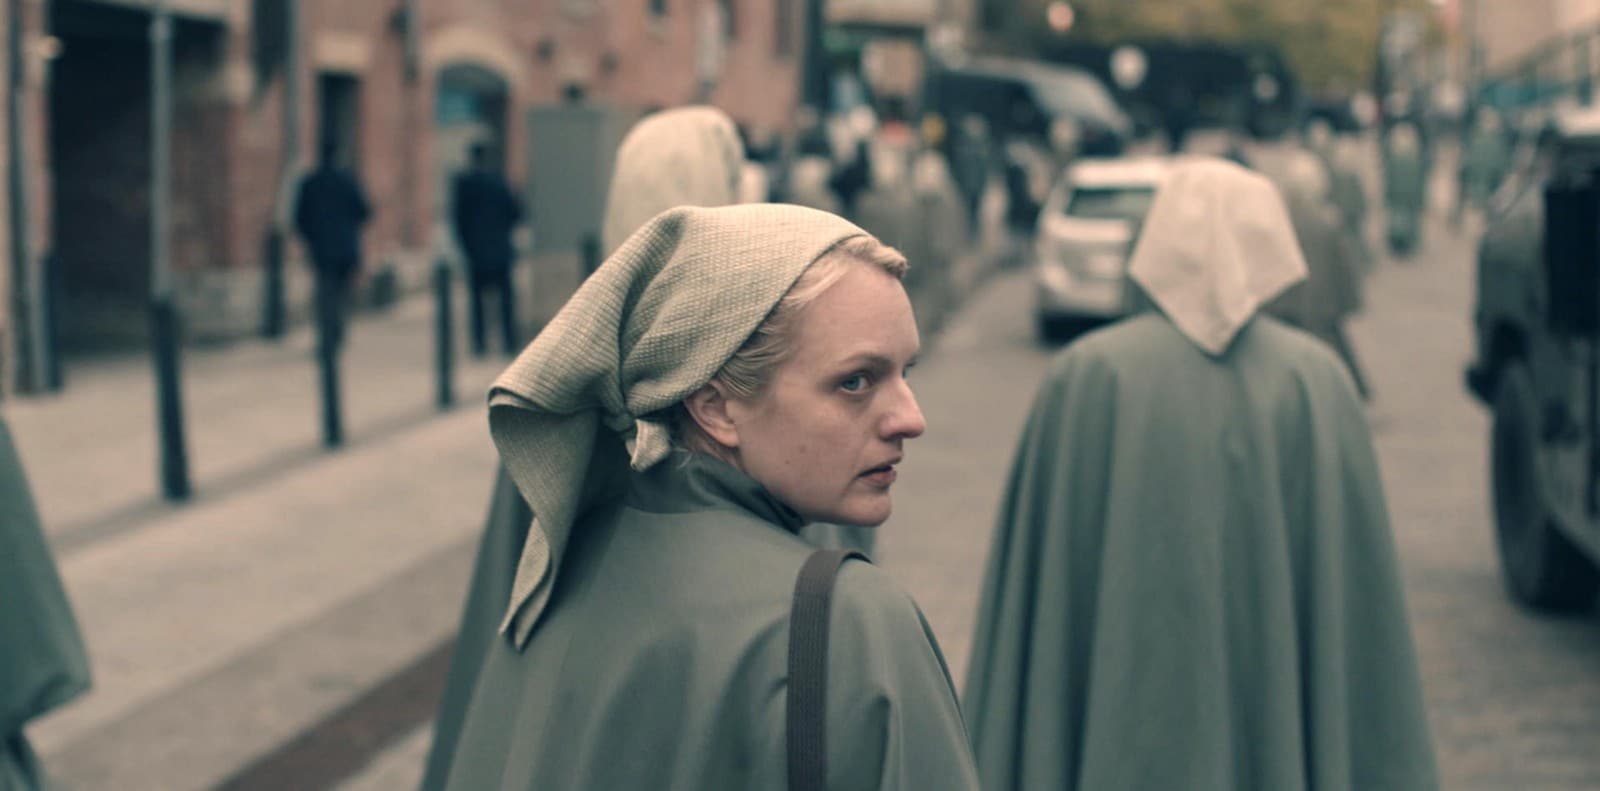 ‘the handmaid’s tale’ is back to remind us where we could be headed if things don’t change